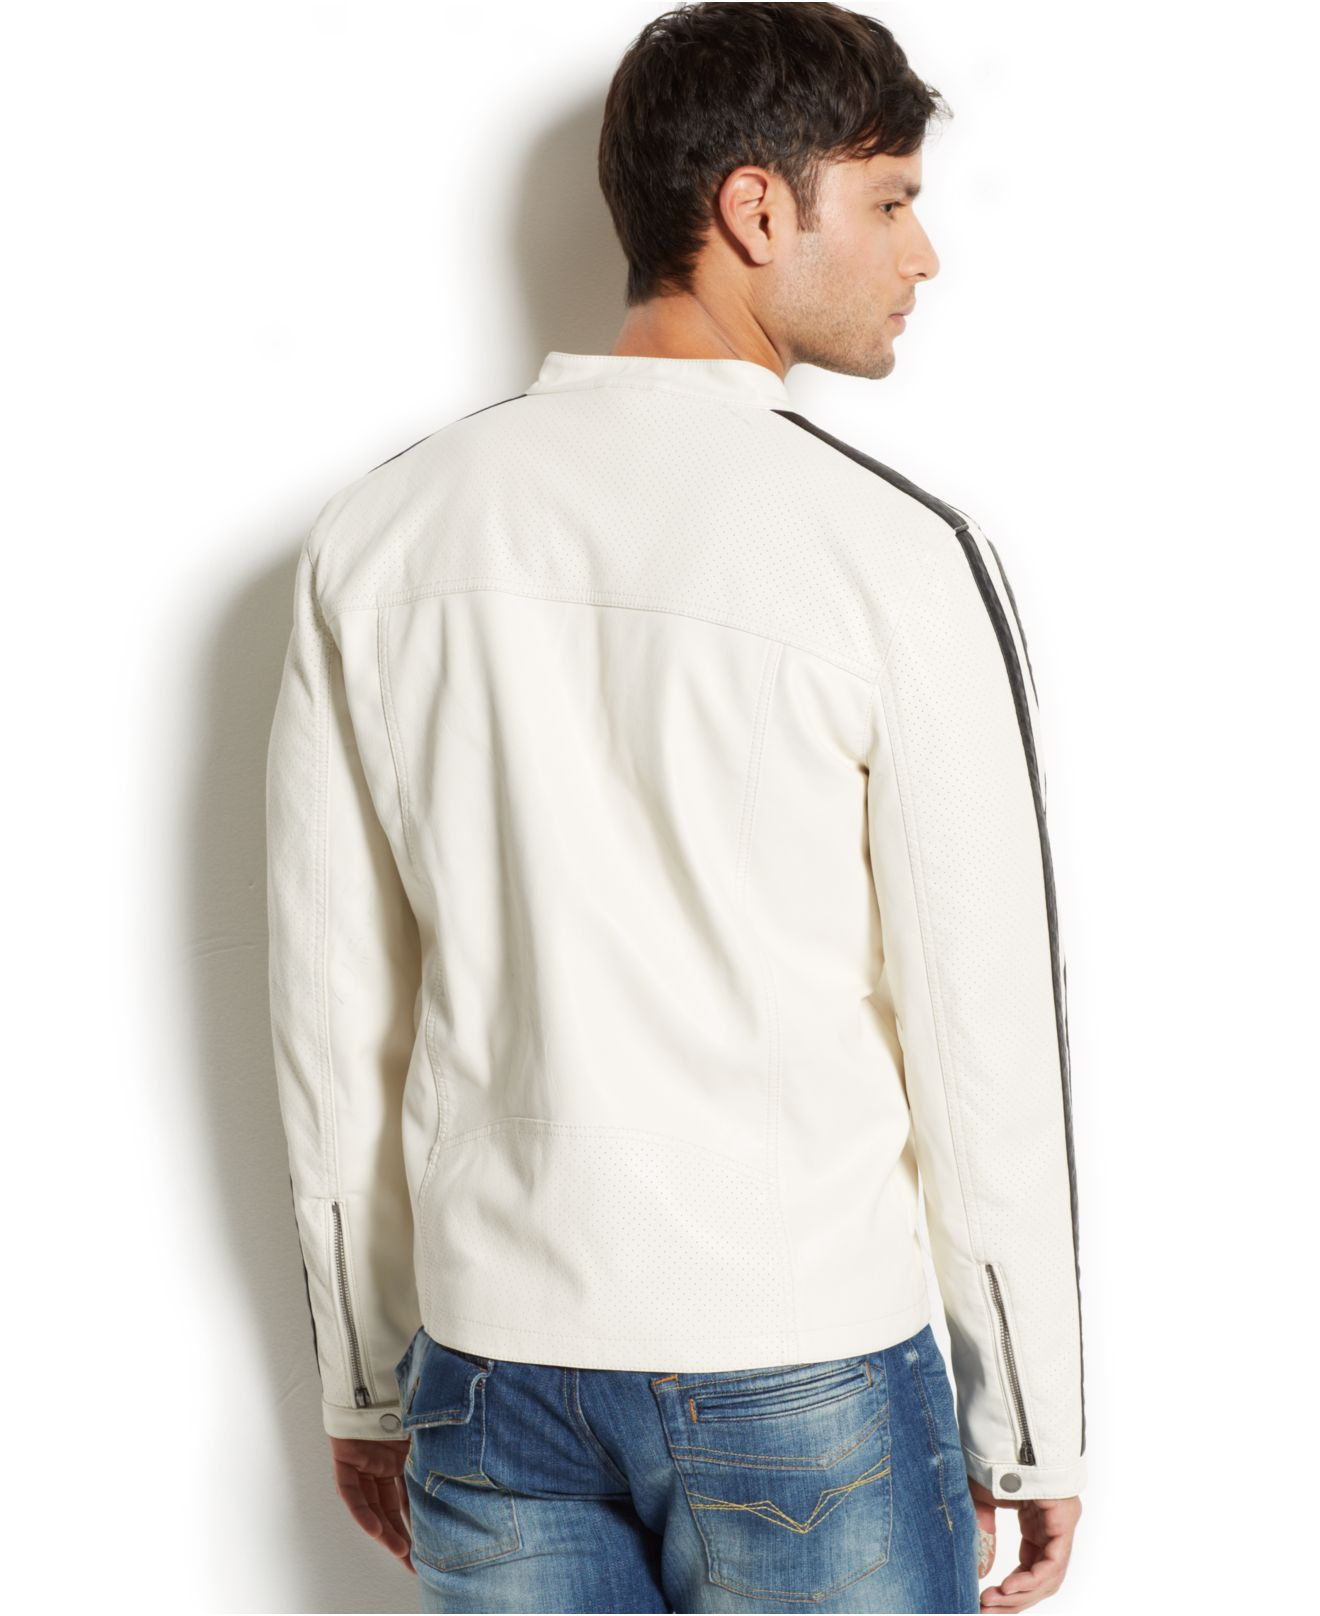 Lyst Guess FauxLeather Moto Jacket in White for Men